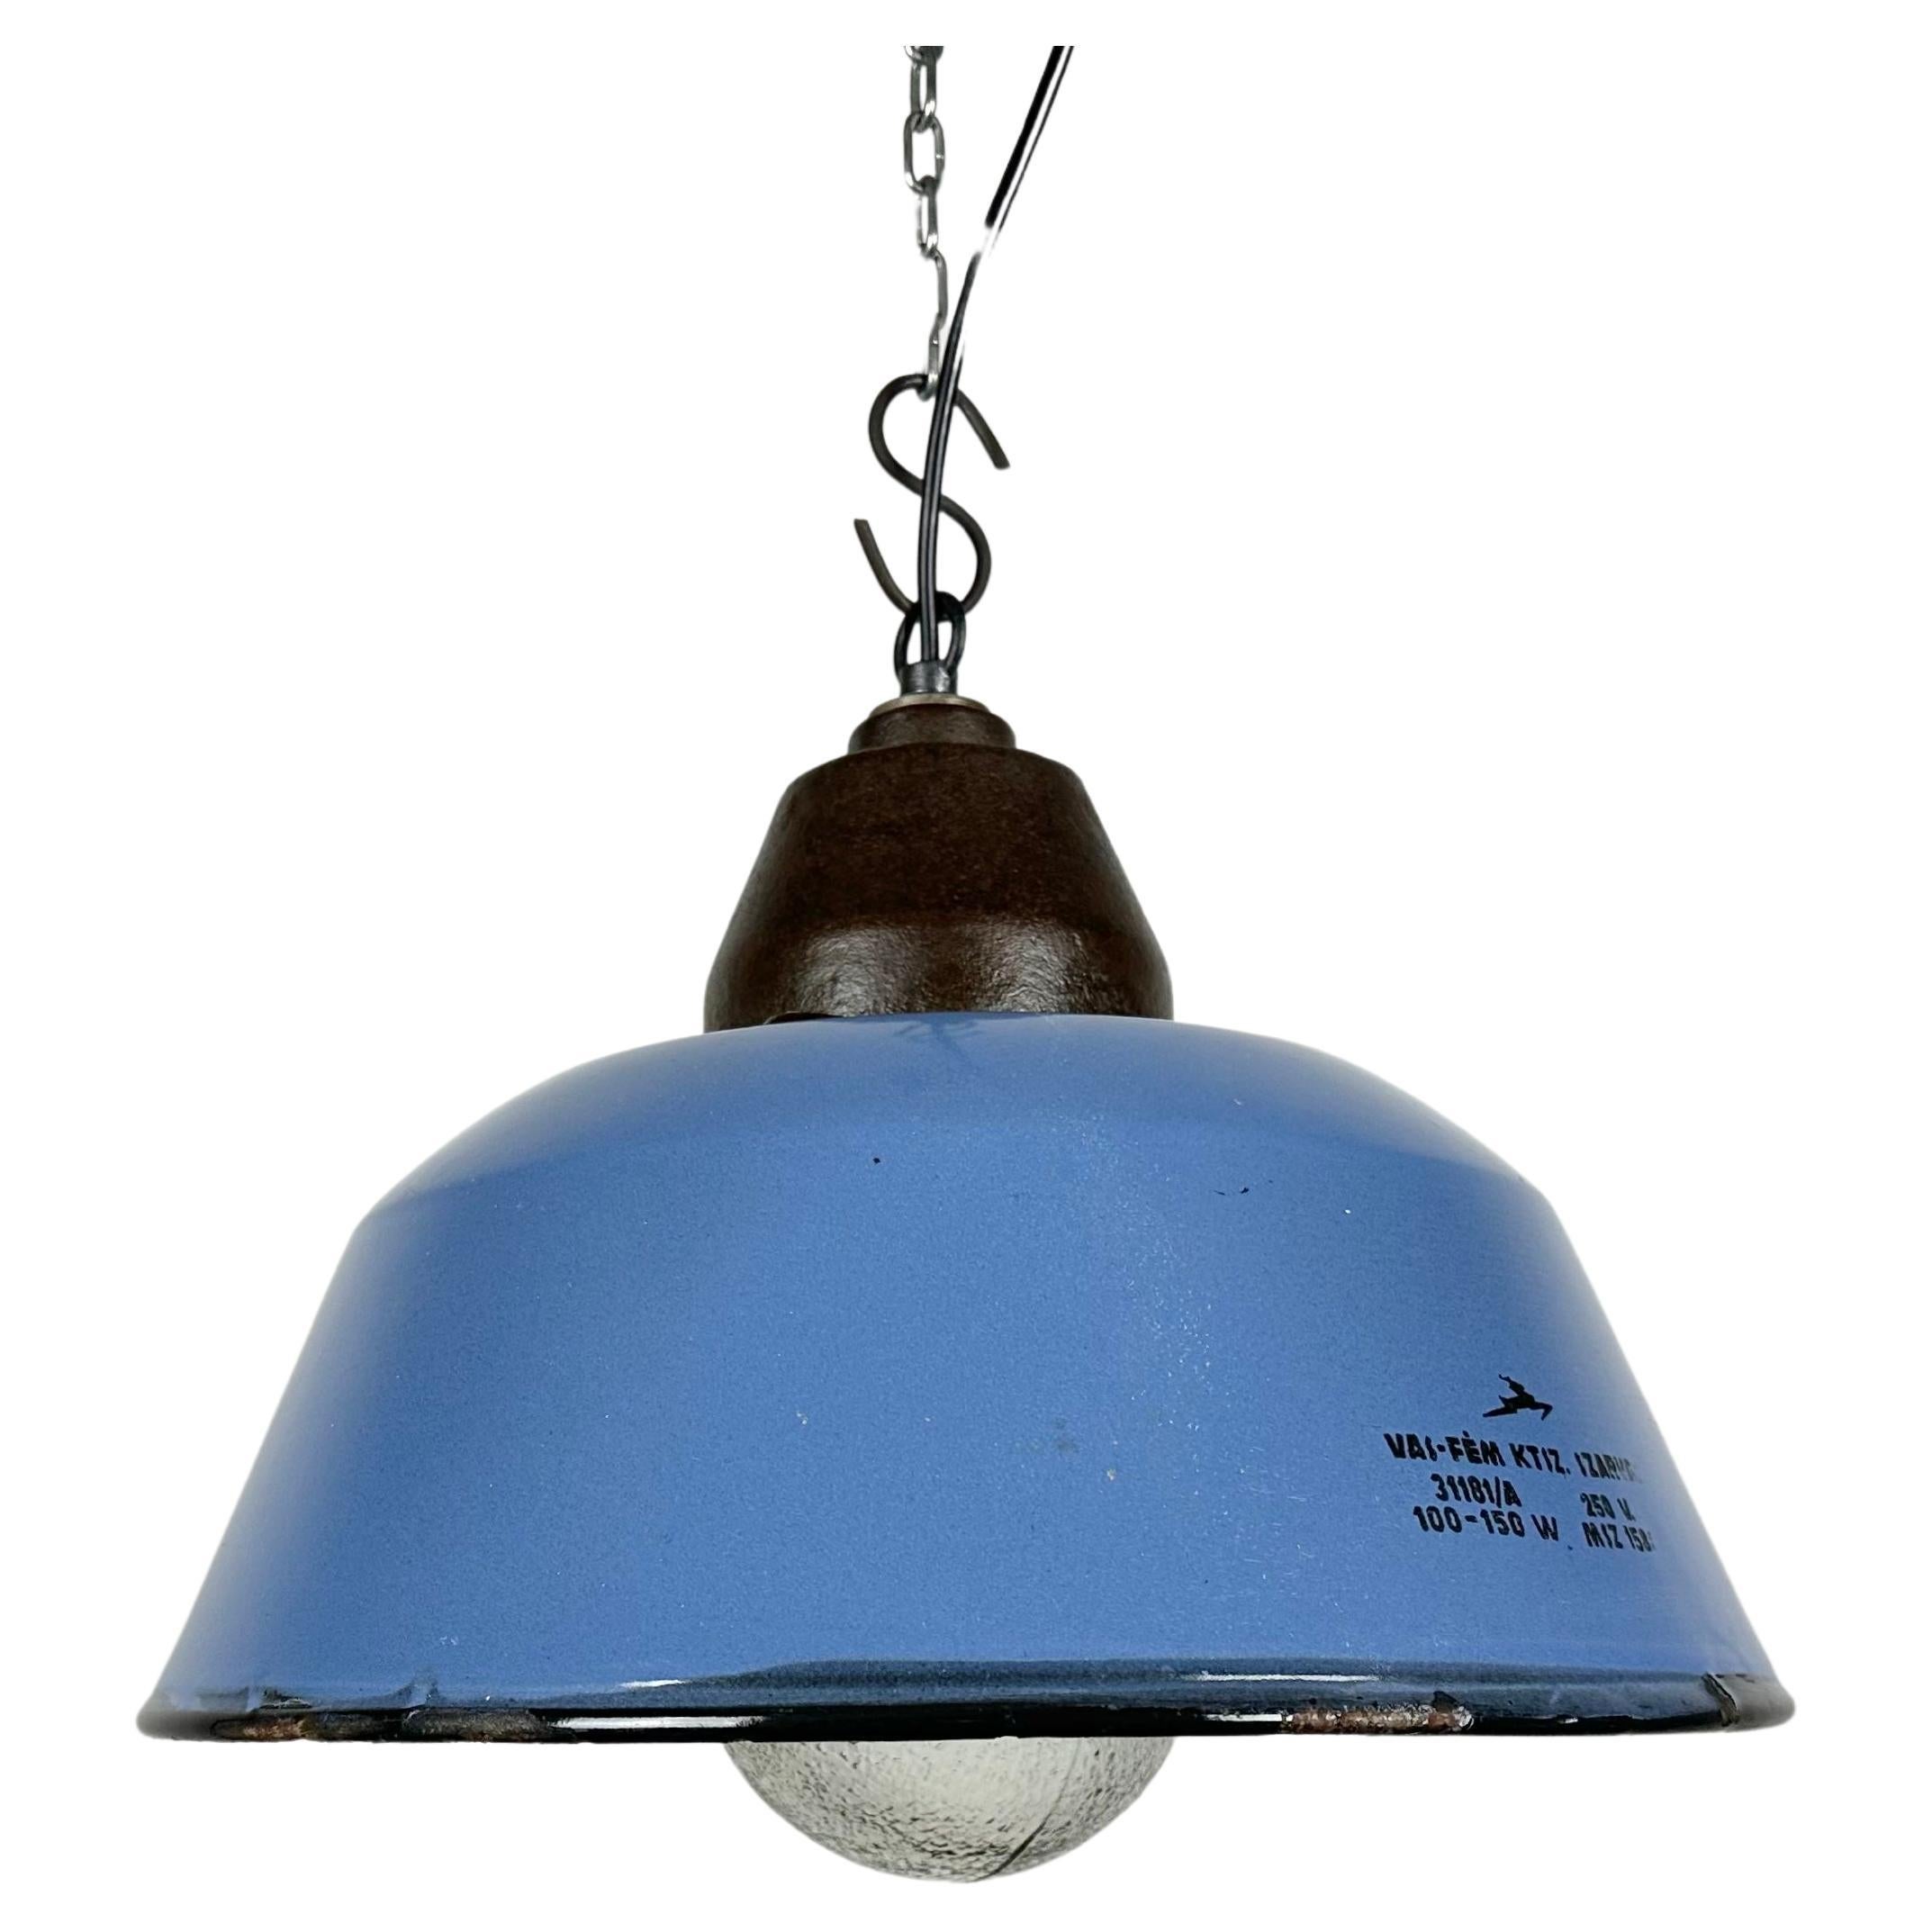 Industrial hanging lamp manufactured by Szarvasi Vas - Fém in Hungary during the 1960s. It features a blue enamel shade, a white enamel interior, a cast iron top and a frosted glass cover New porcelain socket requires E 27/ E26 light bulbs. New